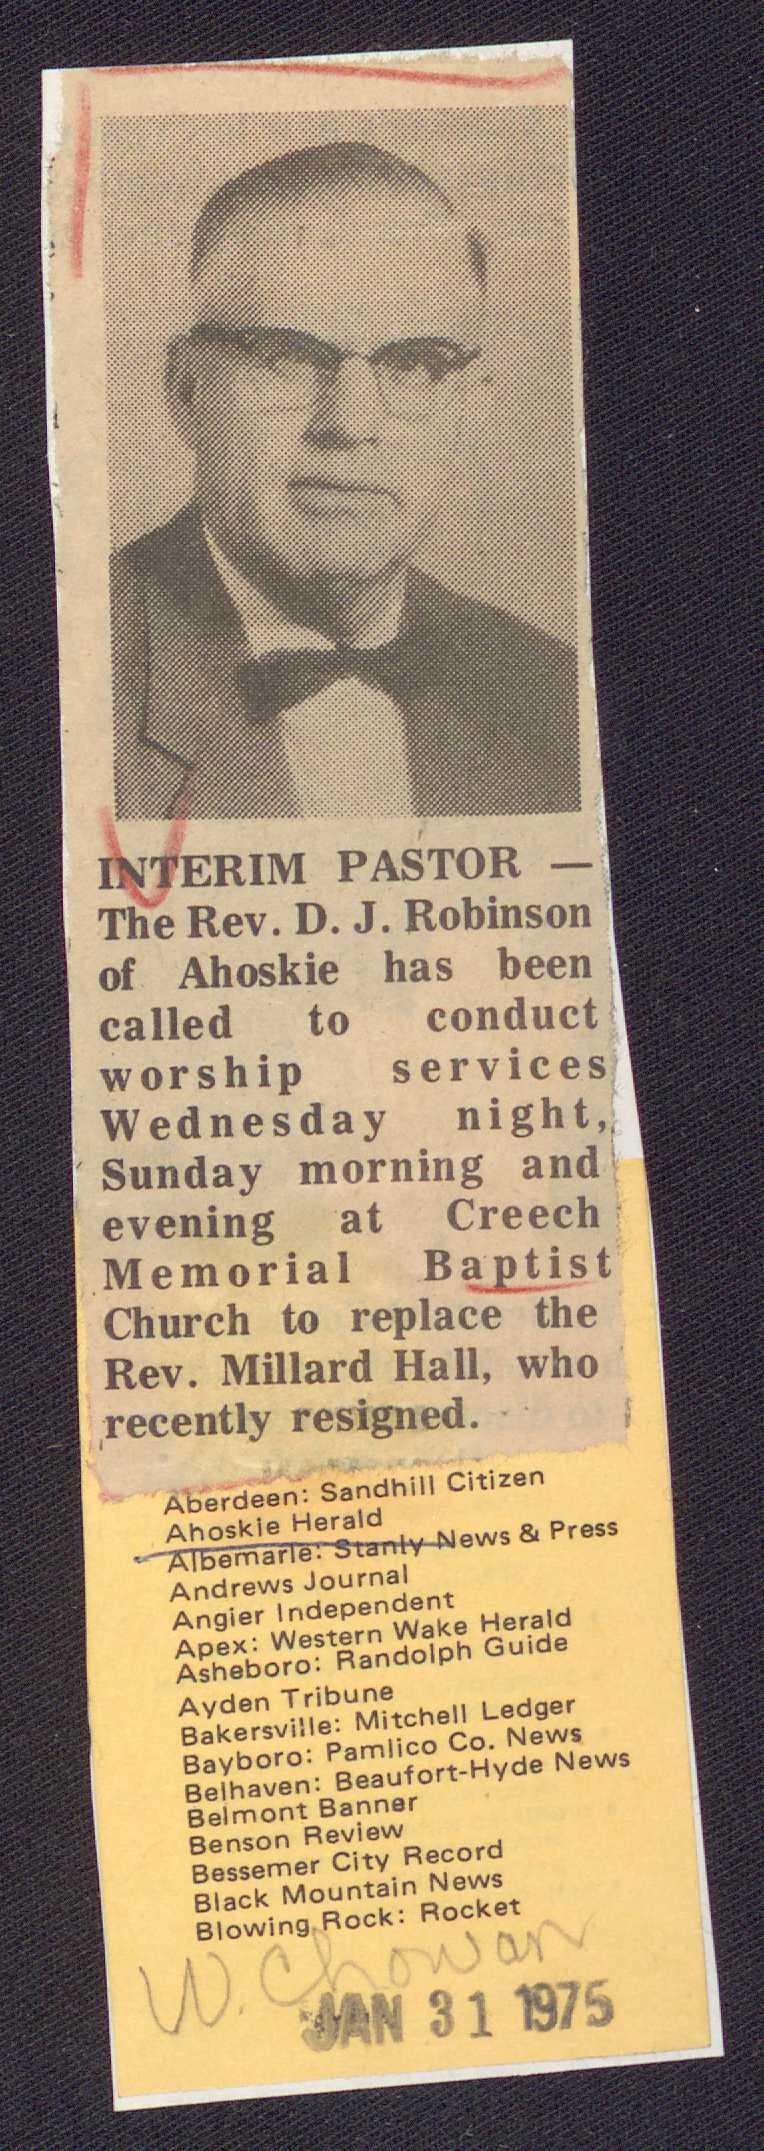 , N ERM PASTOR, The Rev. D. J. Robinson 1 of Ahoskie has been, called to conduct worship servicesj Wednesday night, Sunday morning and ( evening at Creech ' Memorial B~J!.!ist Church to replace the Rev.